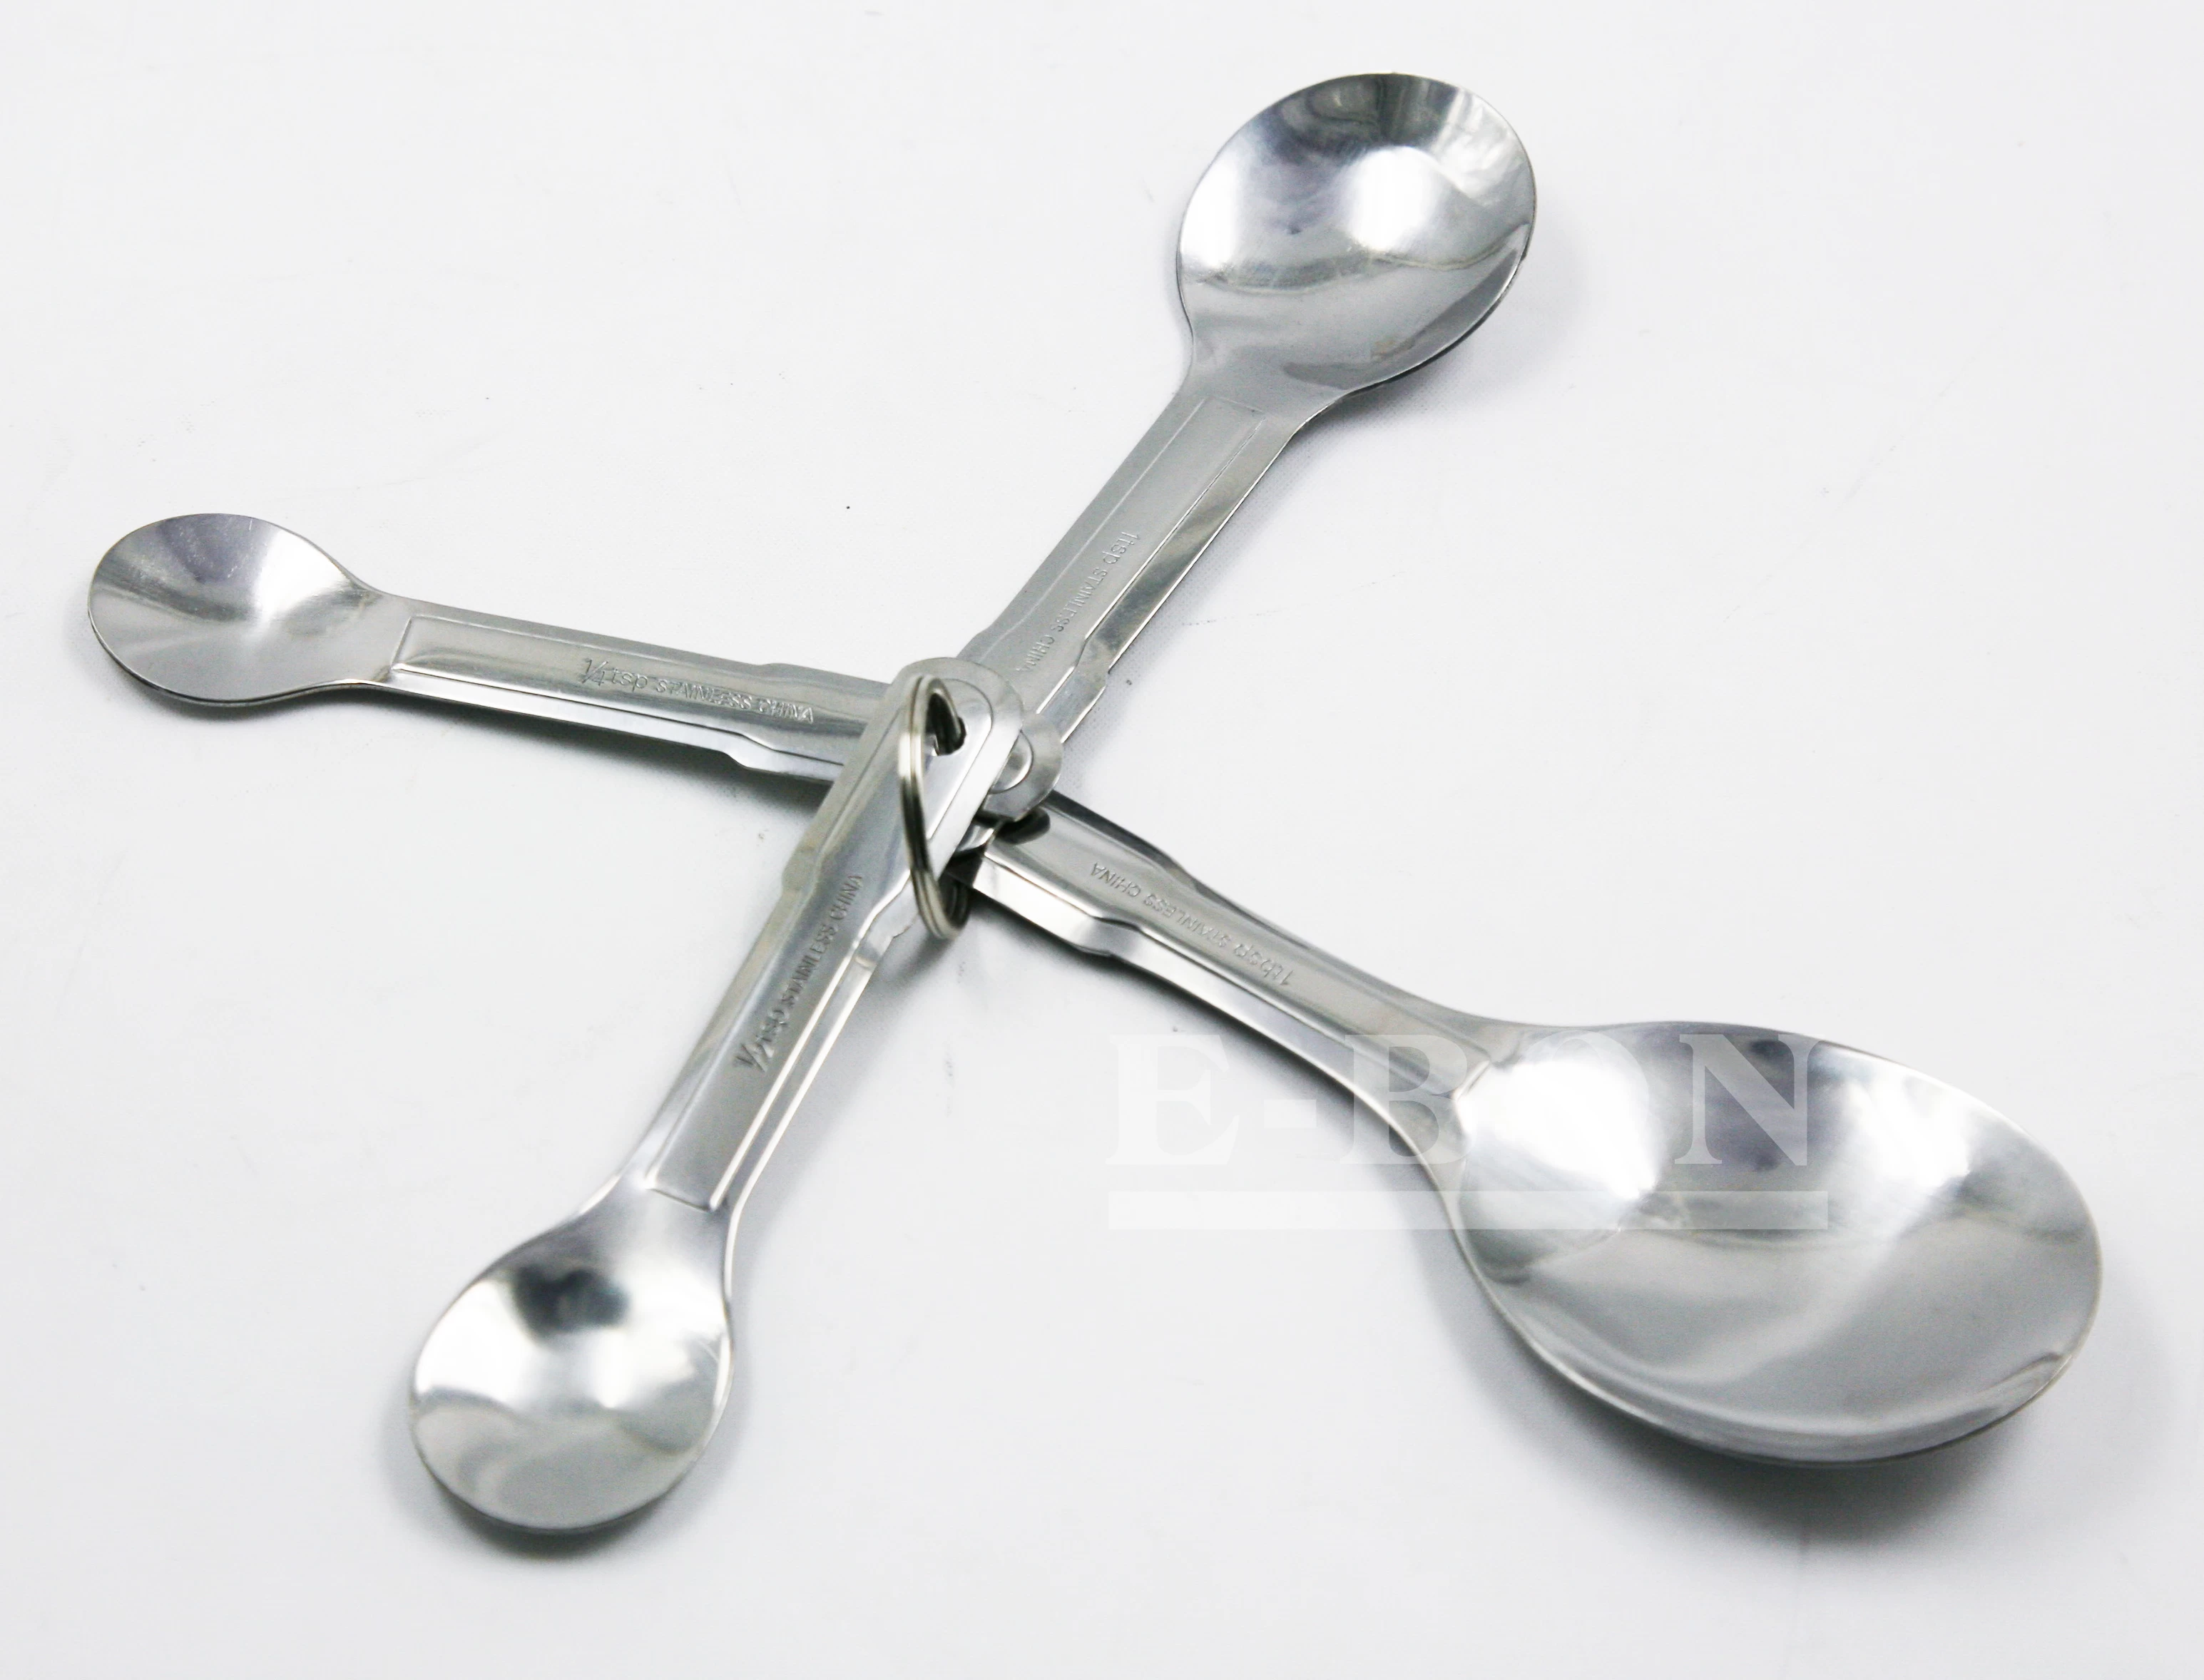 Stainless Steel Measuring Spoon factory, China Measuring Spoon factory